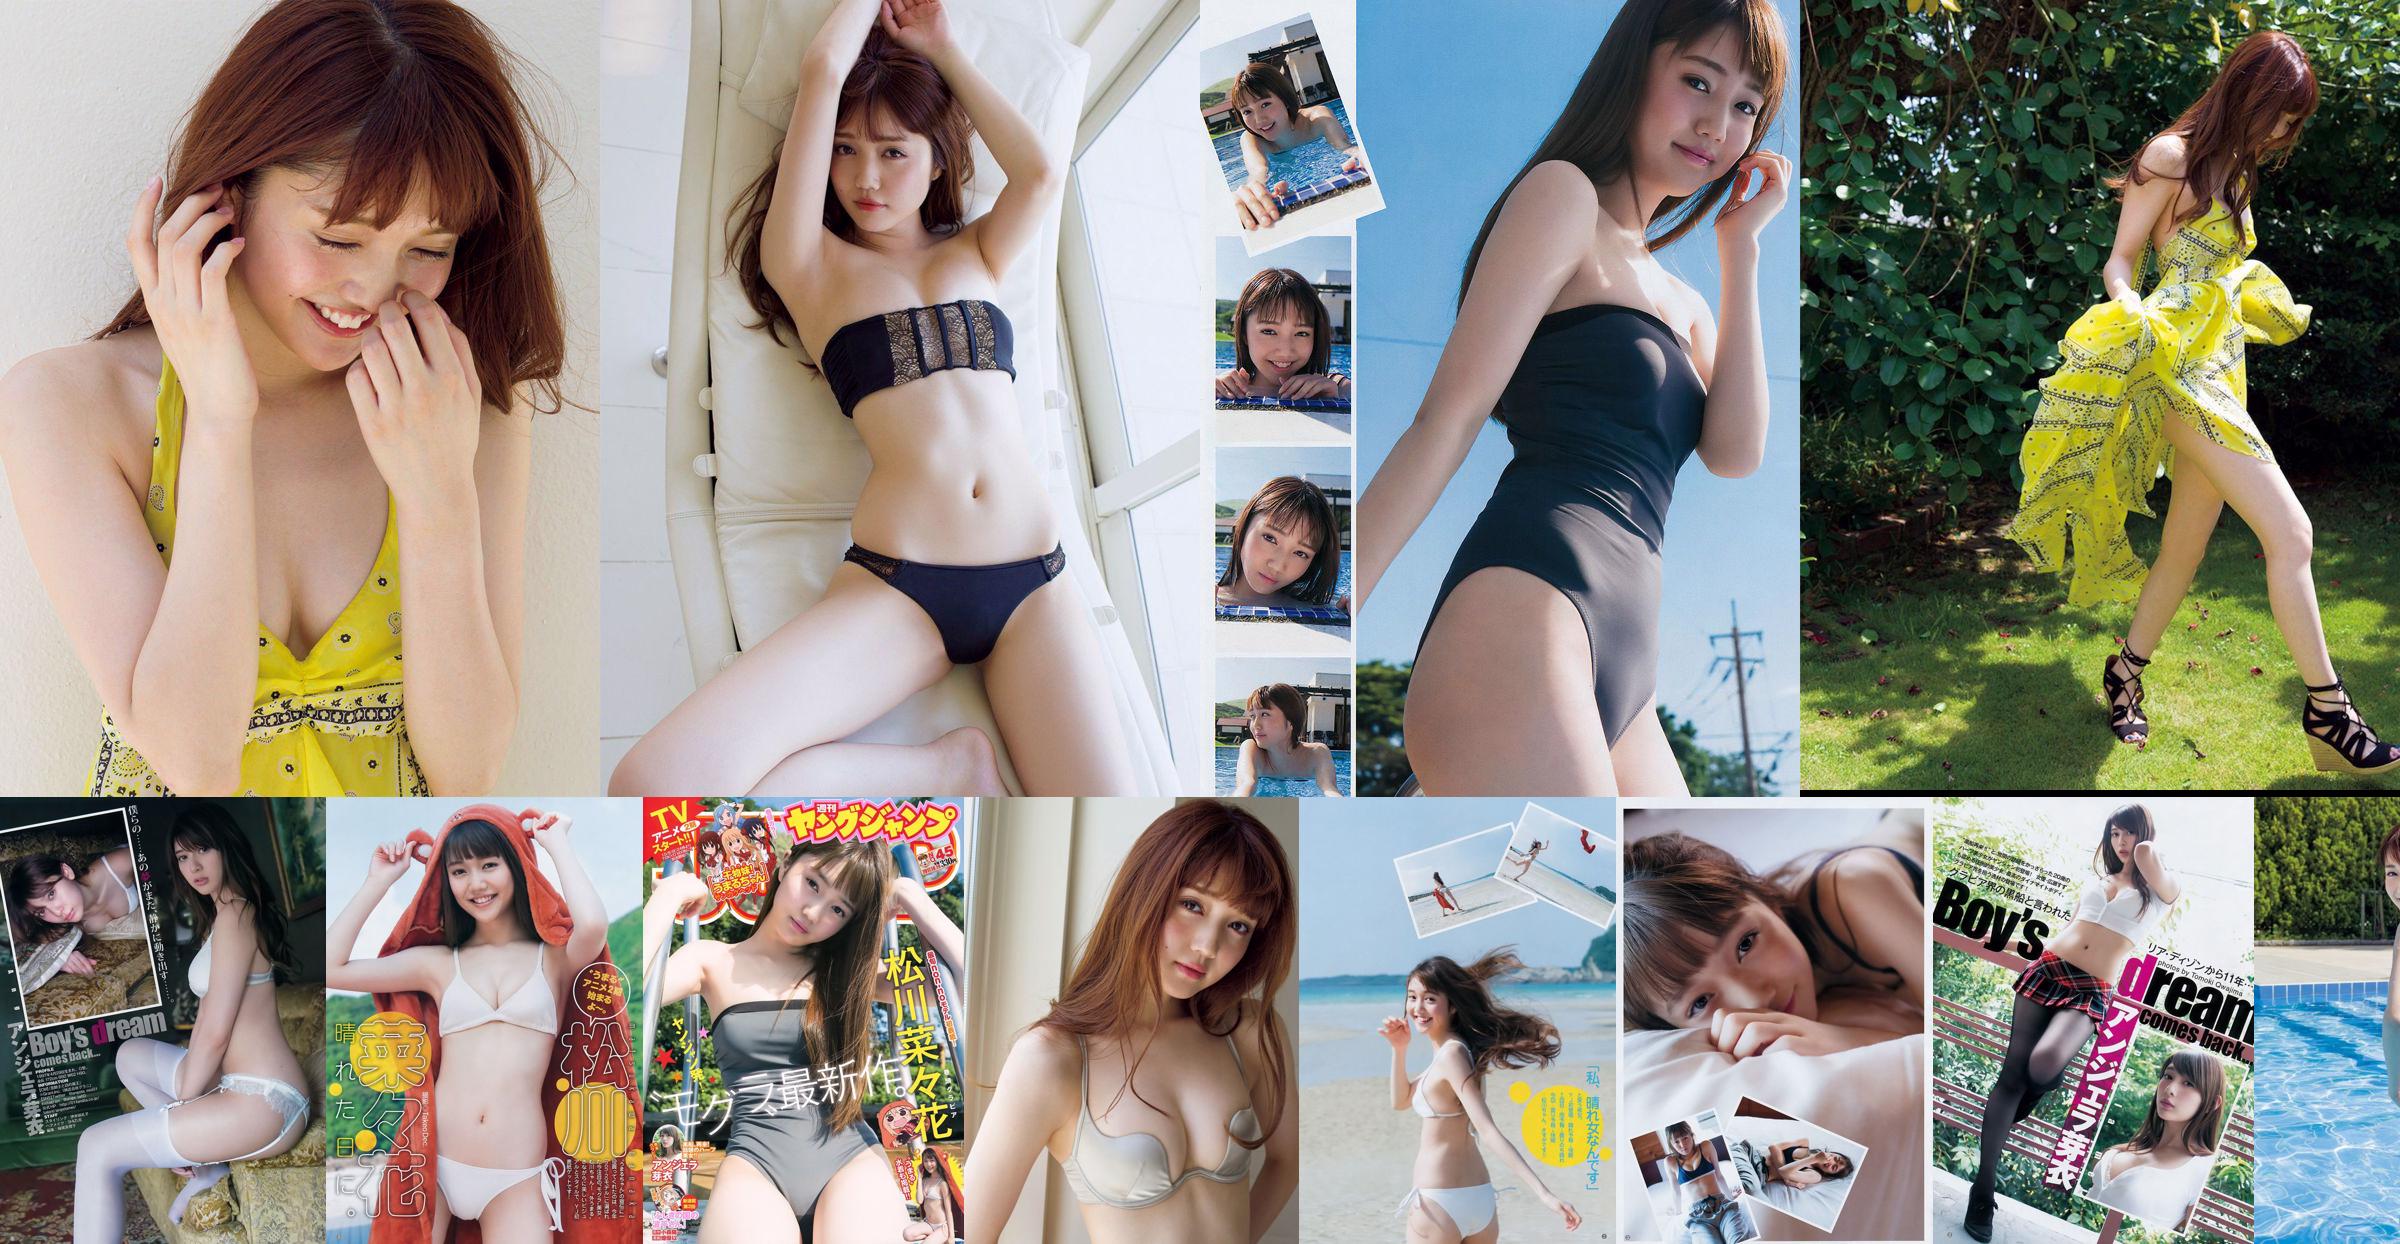 [FRIDAY] Nanaka Matsukawa << Popular model and swimsuit date awesome 20-year-old sex appeal (with video) >> Photo No.8195ce Page 1